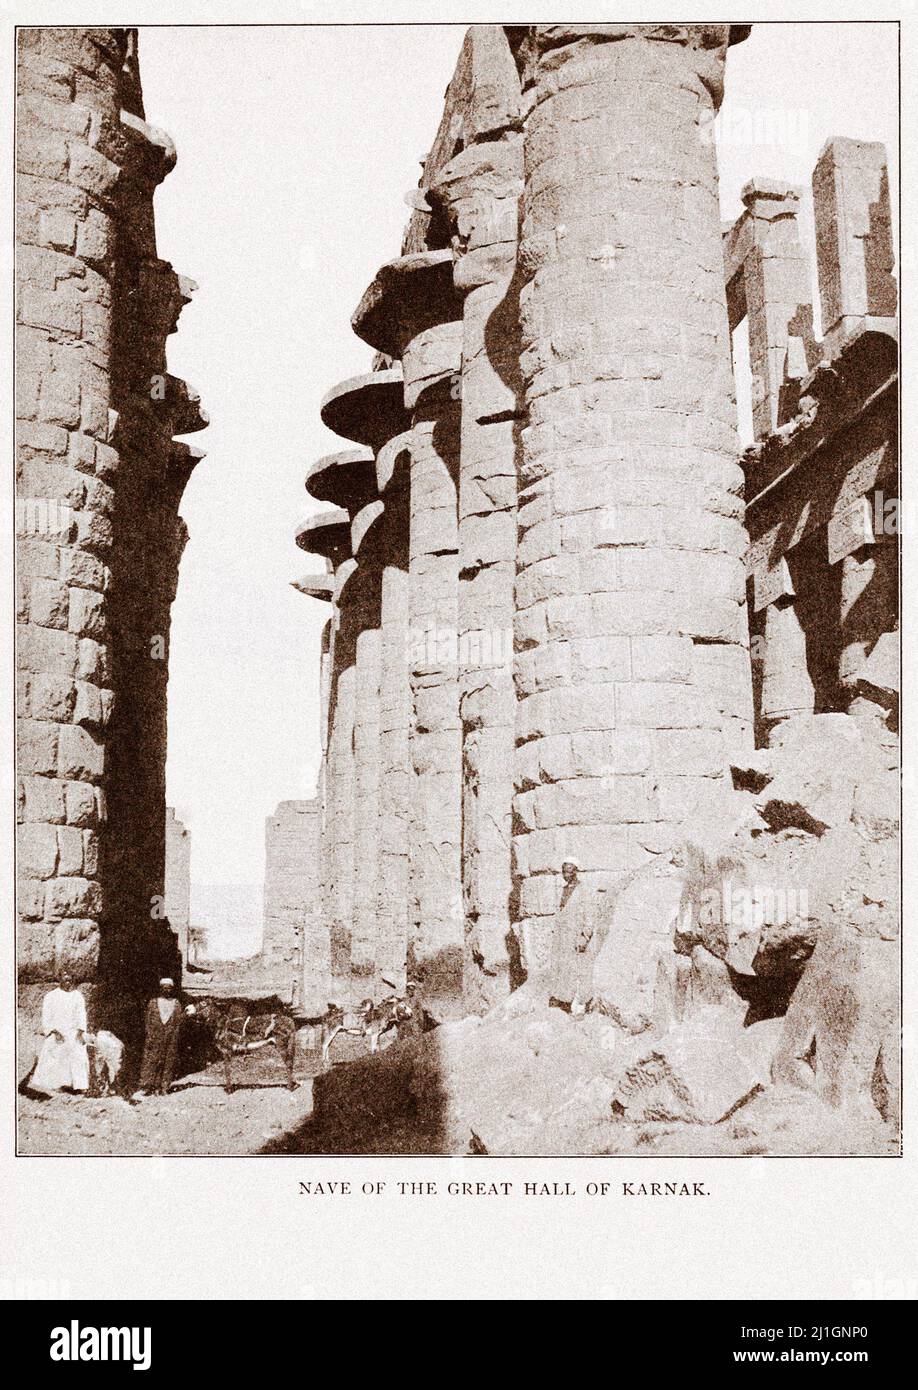 Ancient Egypt. The New Kingdom (1549–1069 BC). Illustration from book of 1912 Nave of the Great Hall of Karnak. Looking westward toward the Nile from Stock Photo